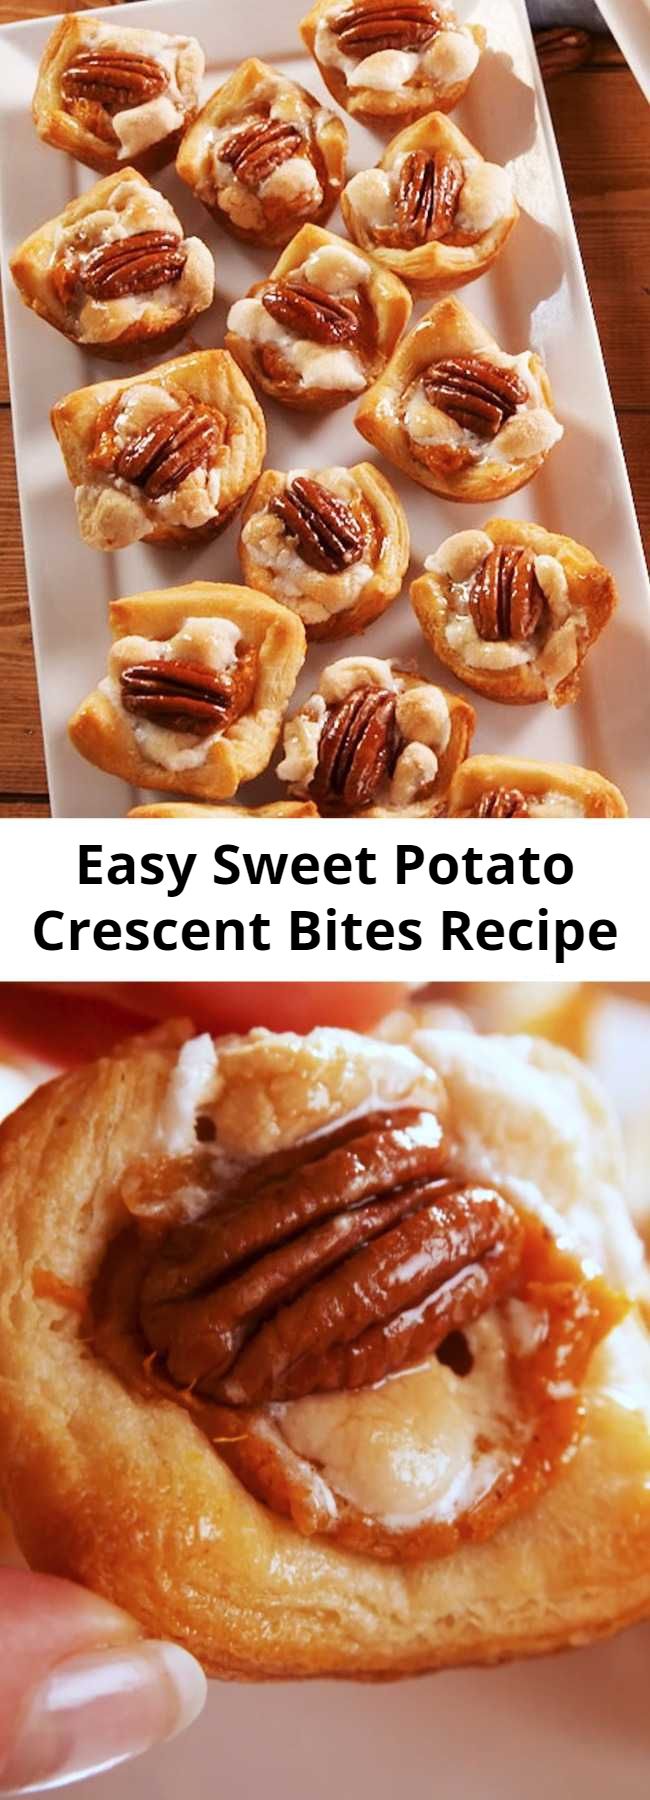 Easy Sweet Potato Crescent Bites Recipe - A guarantee: You will NOT be able to stop eating these little guys. They're the perfect amount of sweet and savory, so you can serve them before or after the big meal! Sweet Potato Crescent Bites from Delish.com are a great appetizer for this Thanksgiving. #easy #recipe #thanksgiving #holiday #app #appetizer #fingerfoods #Pecan #crescentrolls #sweetpotato #potato #marshmallows #minimarshmallows #quick